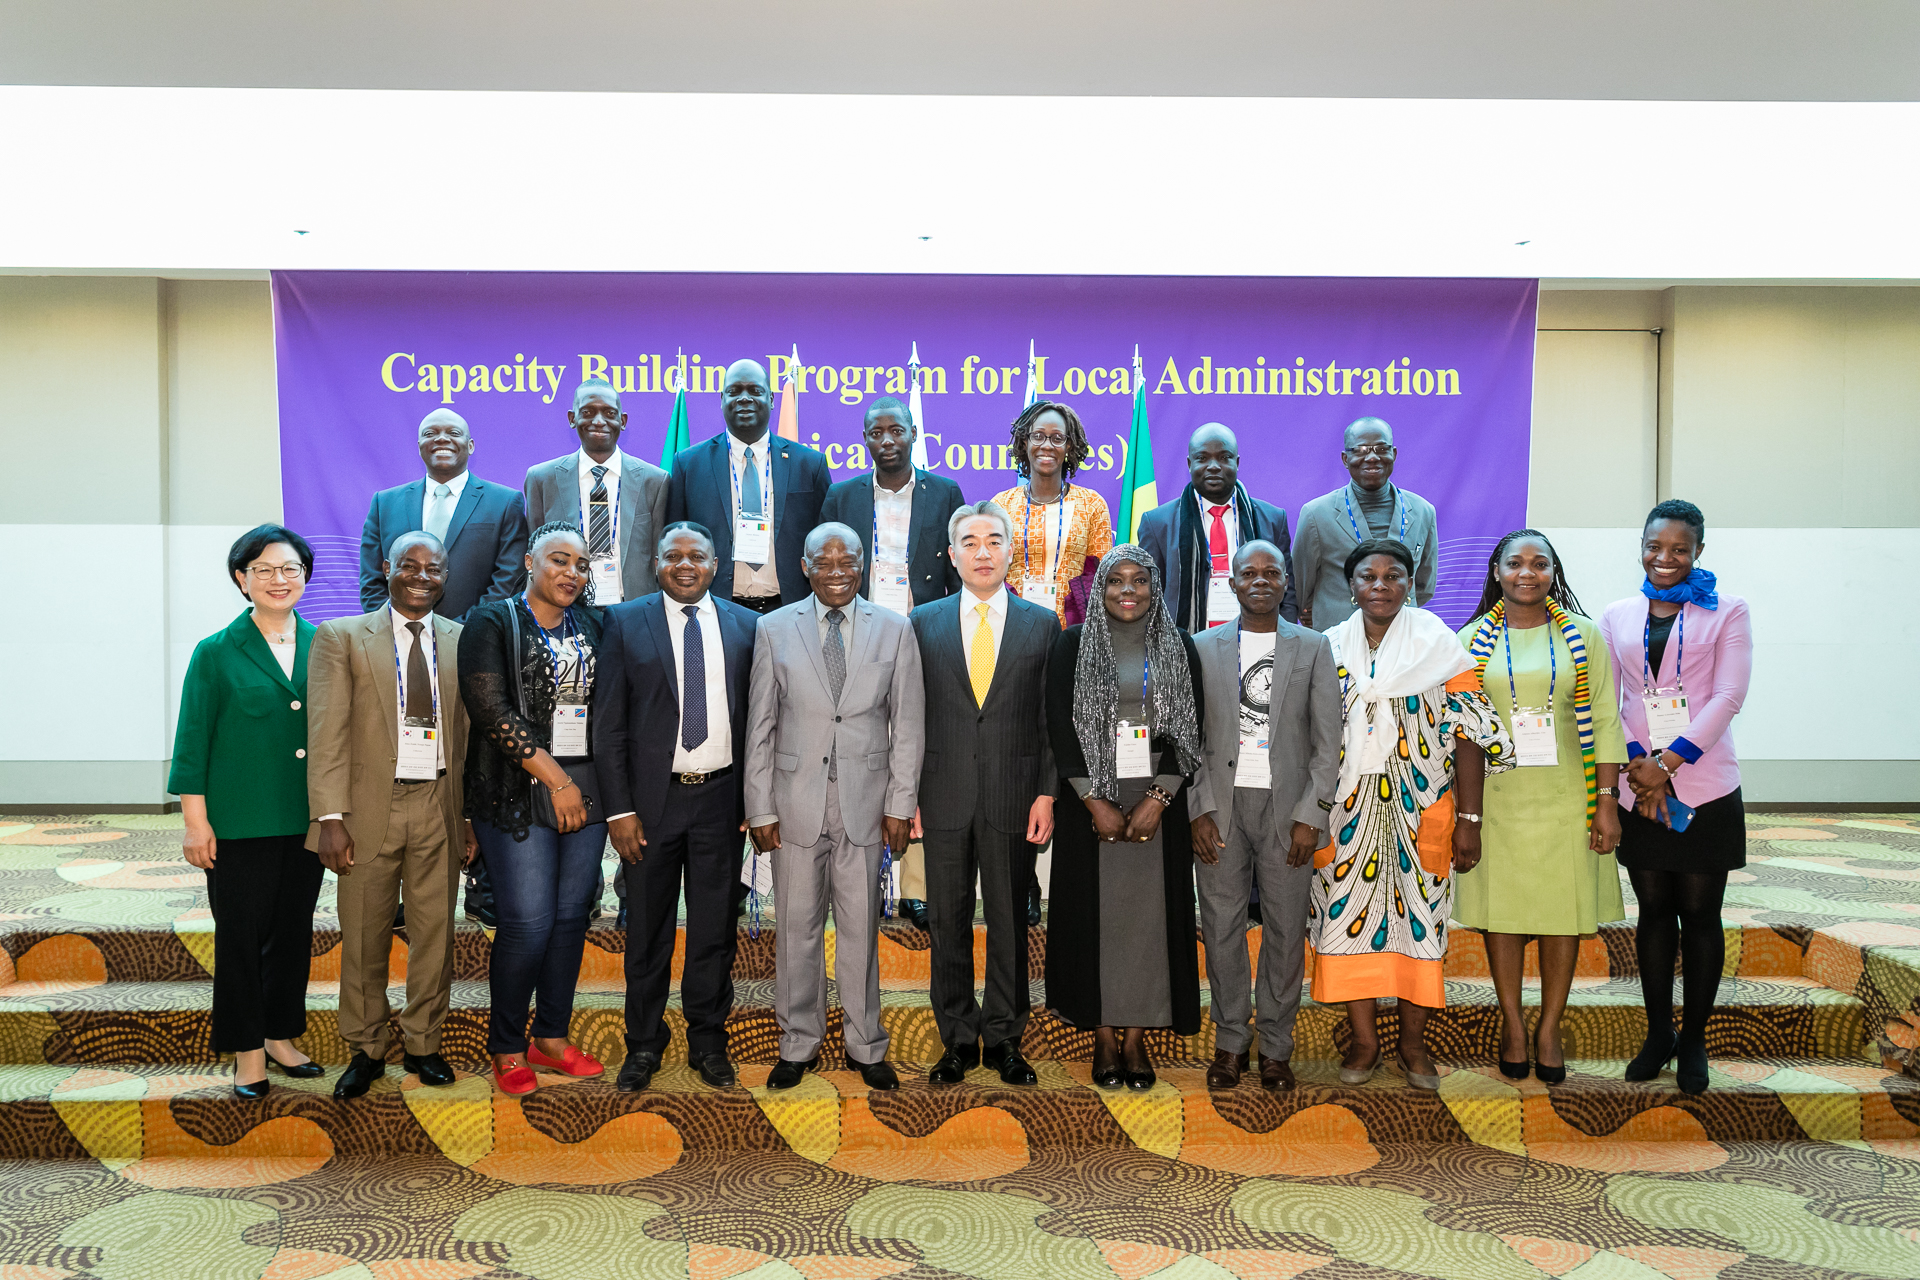 16 officials from Africa share national development experiences with Korea for 3 weeks 큰 이미지[마우스 클릭 시 창닫기]